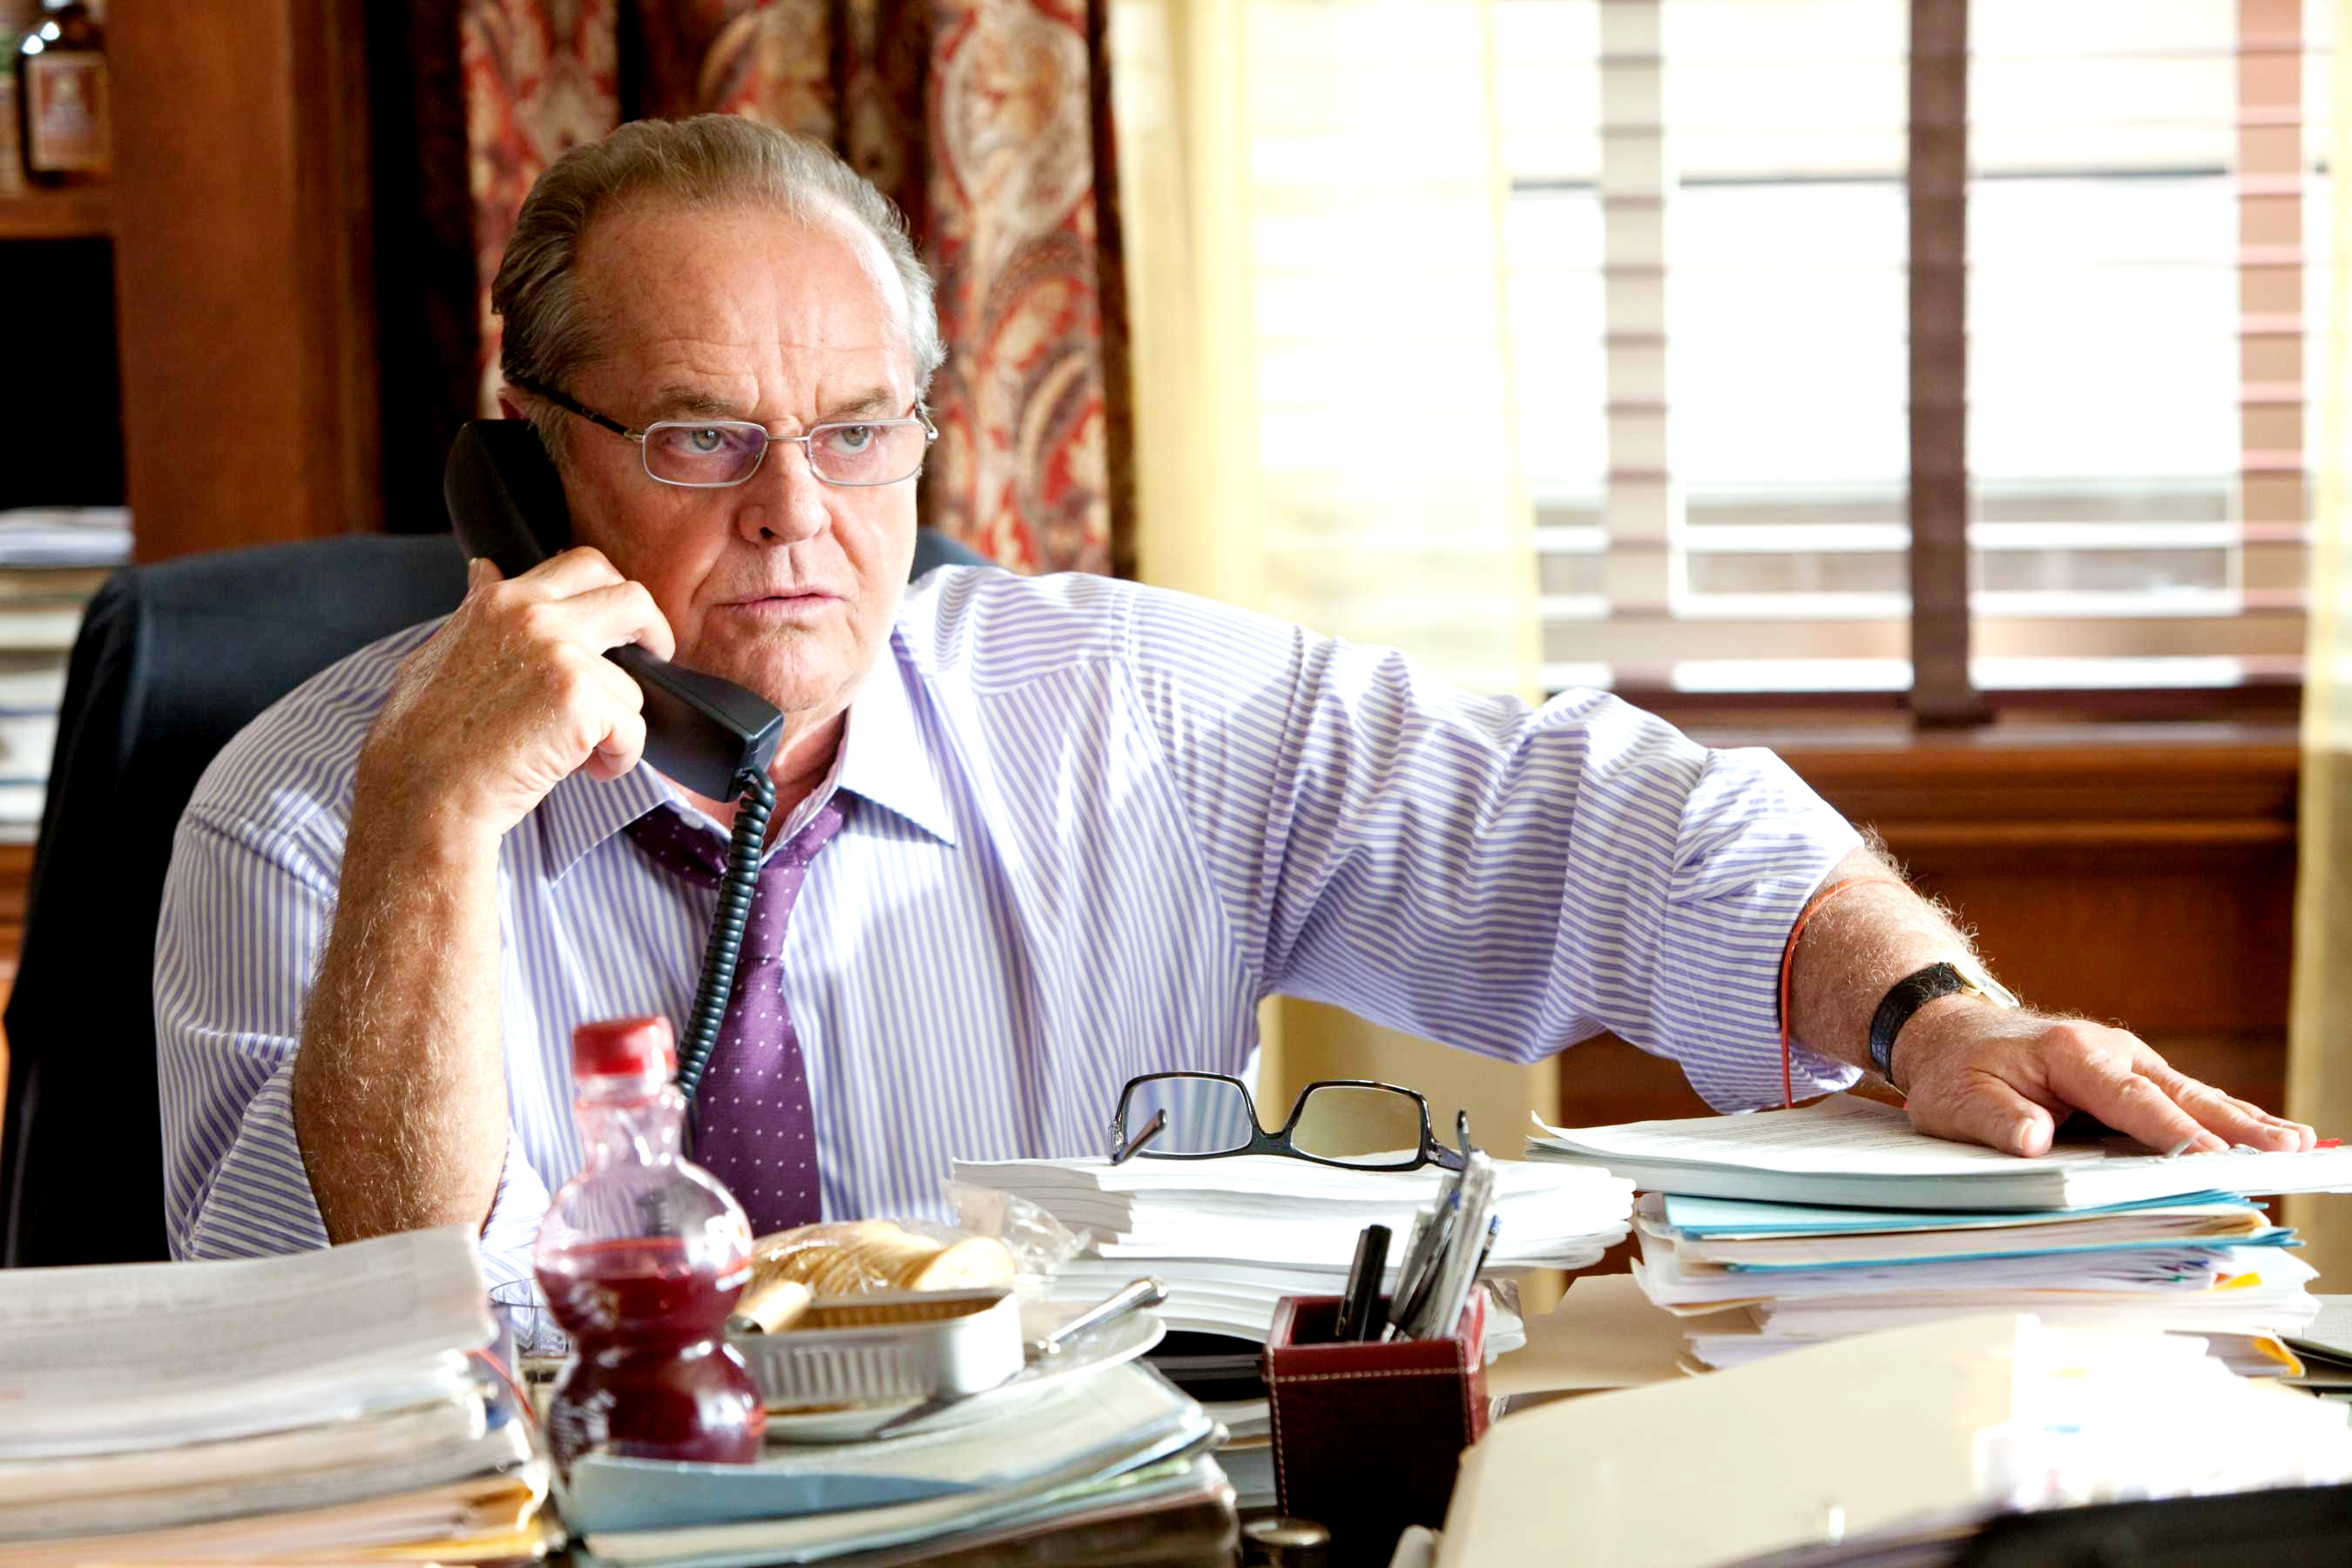 Jack Nicholson stars as Charles in Columbia Pictures' How Do You Know (2010)